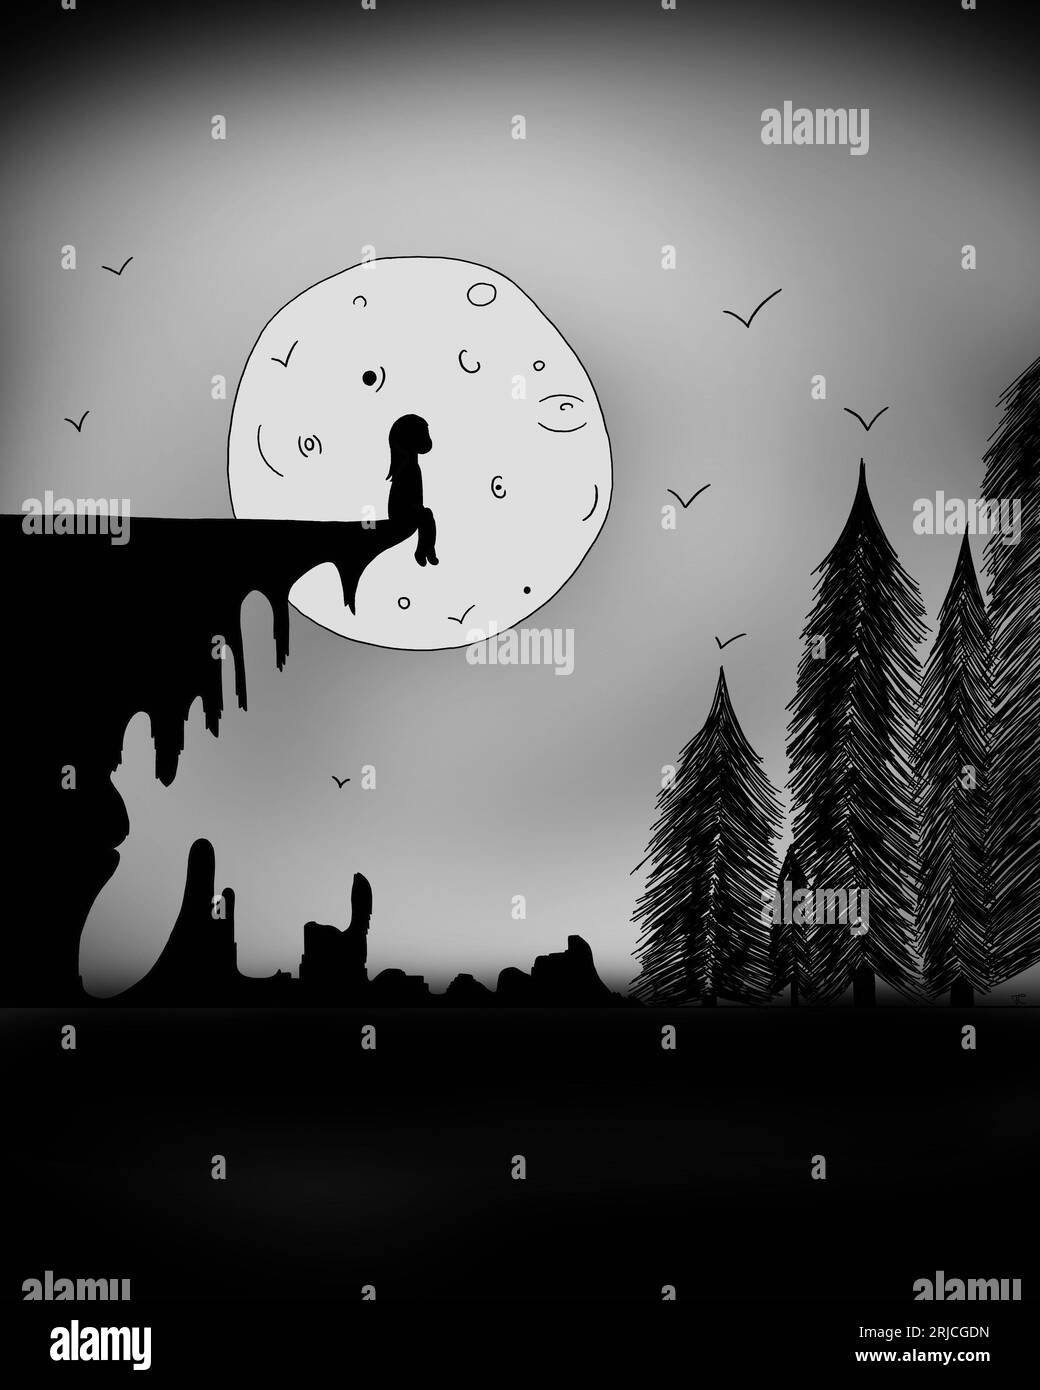 Abstract silhouette cartoon drawing of a girl sitting on the edge of a cliff overlooking the forest with the moon and night sky in the background. Stock Photo